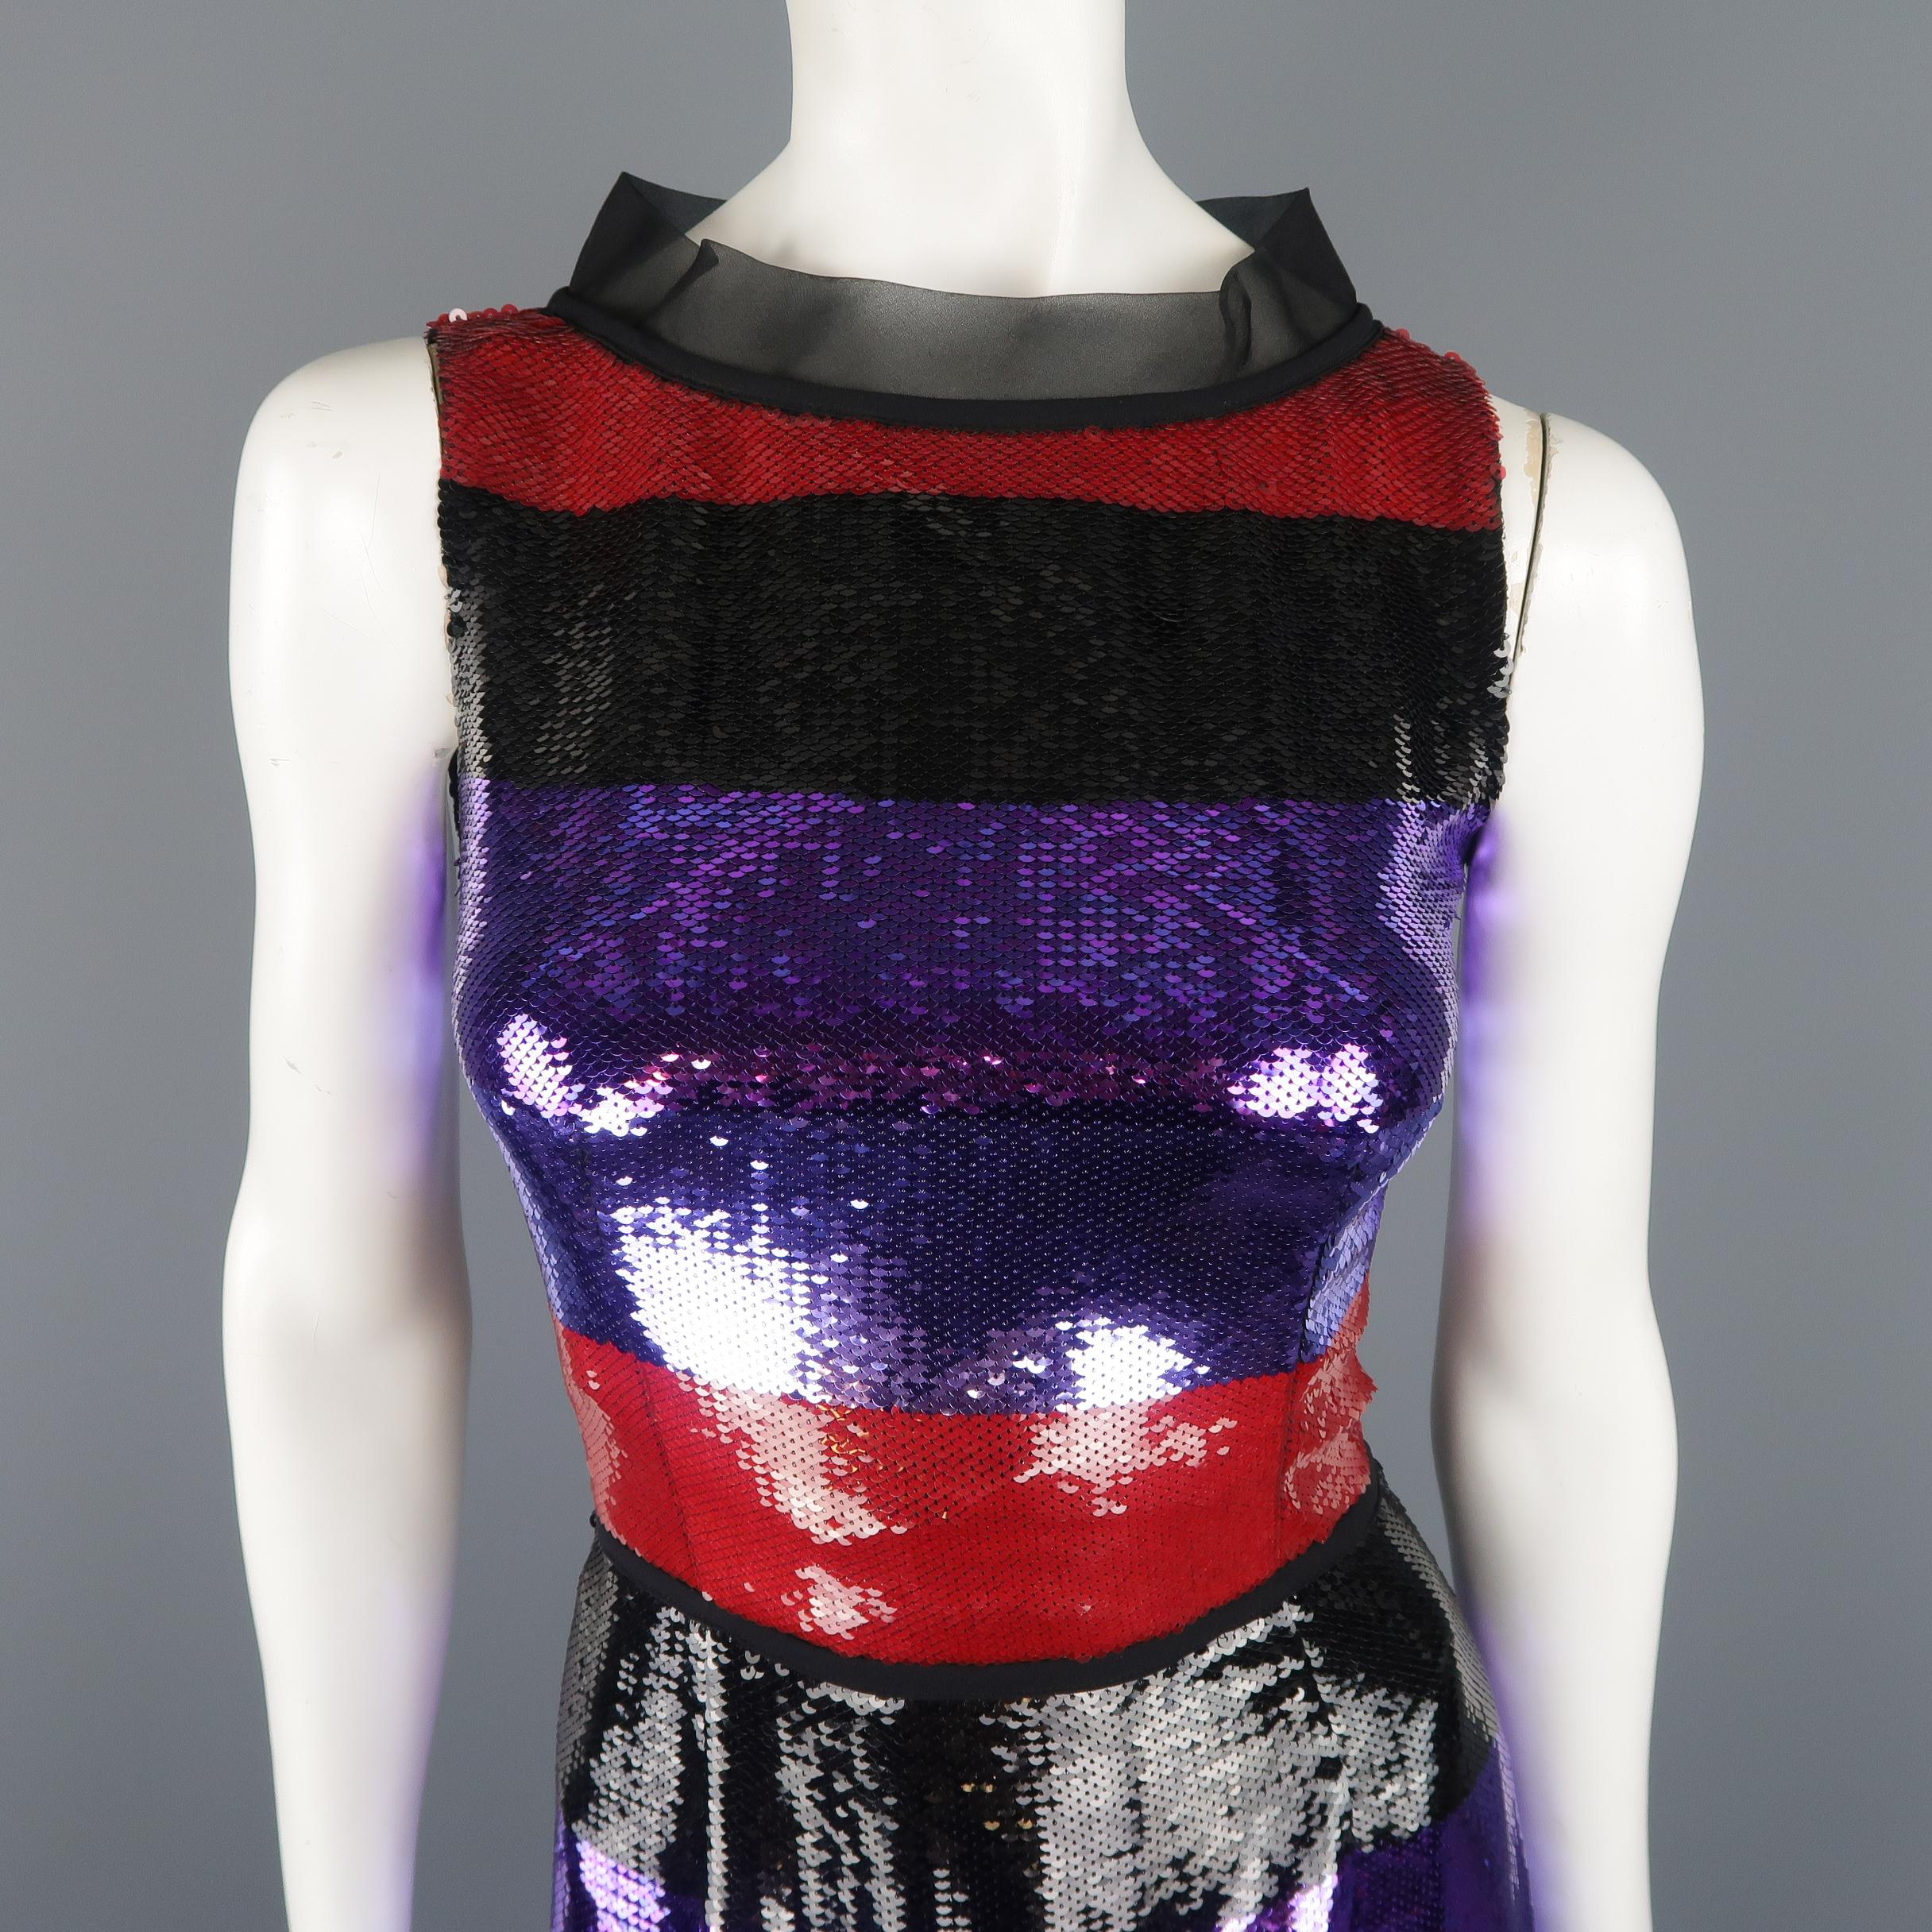 This gorgeous Prada column gown comes in red, purple, black, and lavender striped pattern sequin material with a chiffon stand up neckline, fitted bodice, and long skirt. Worn once. Tag cut. Made in Italy.
 
Excellent Pre-Owned Condition.
Marked: IT